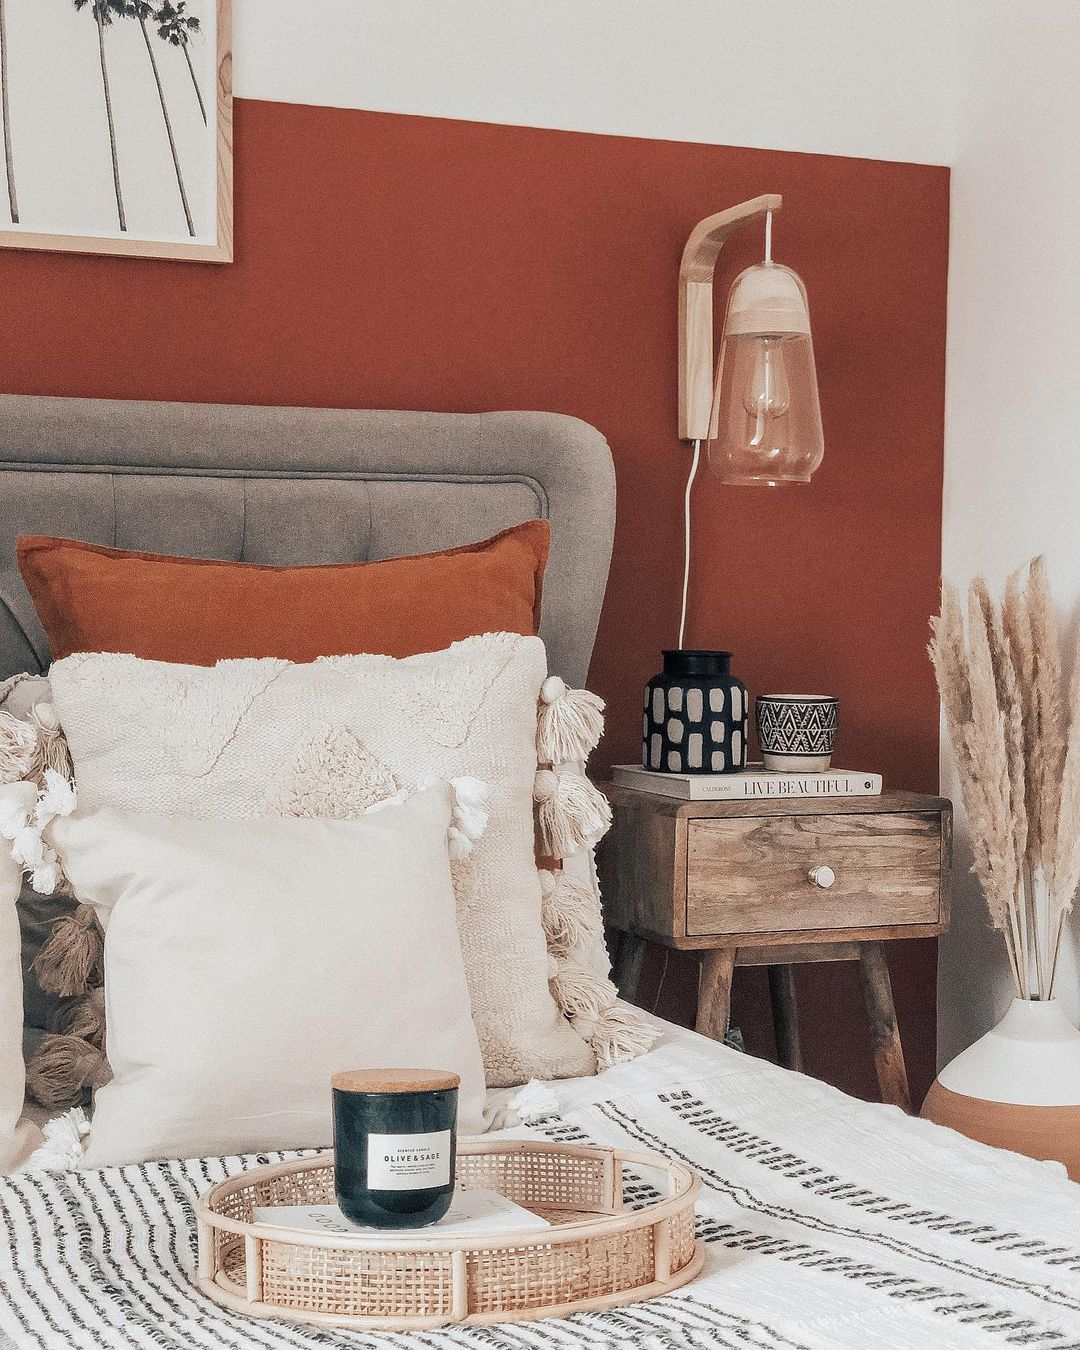 Bedroom pillows and bedding with different textures. Photo by Instagram User @thefox.home